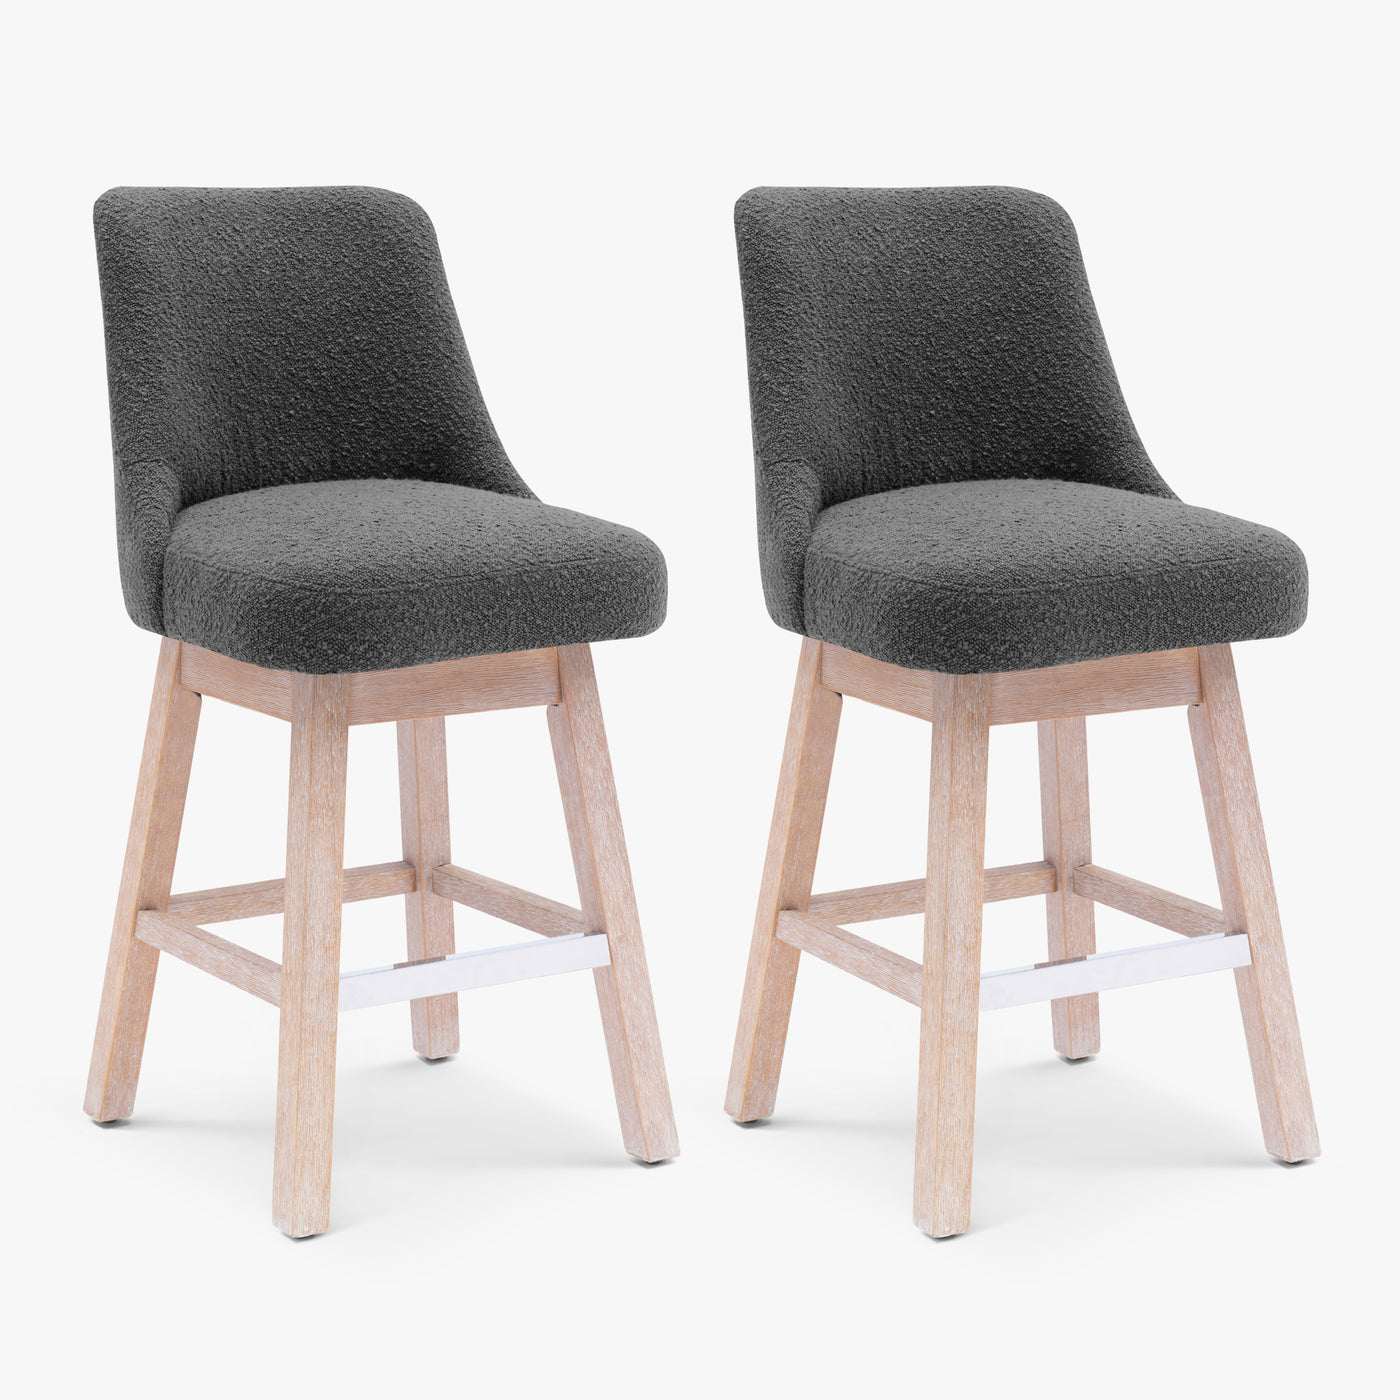 Genevieve 26" Upholstered Swivel Counter Height Bar Stools (Set of 2)